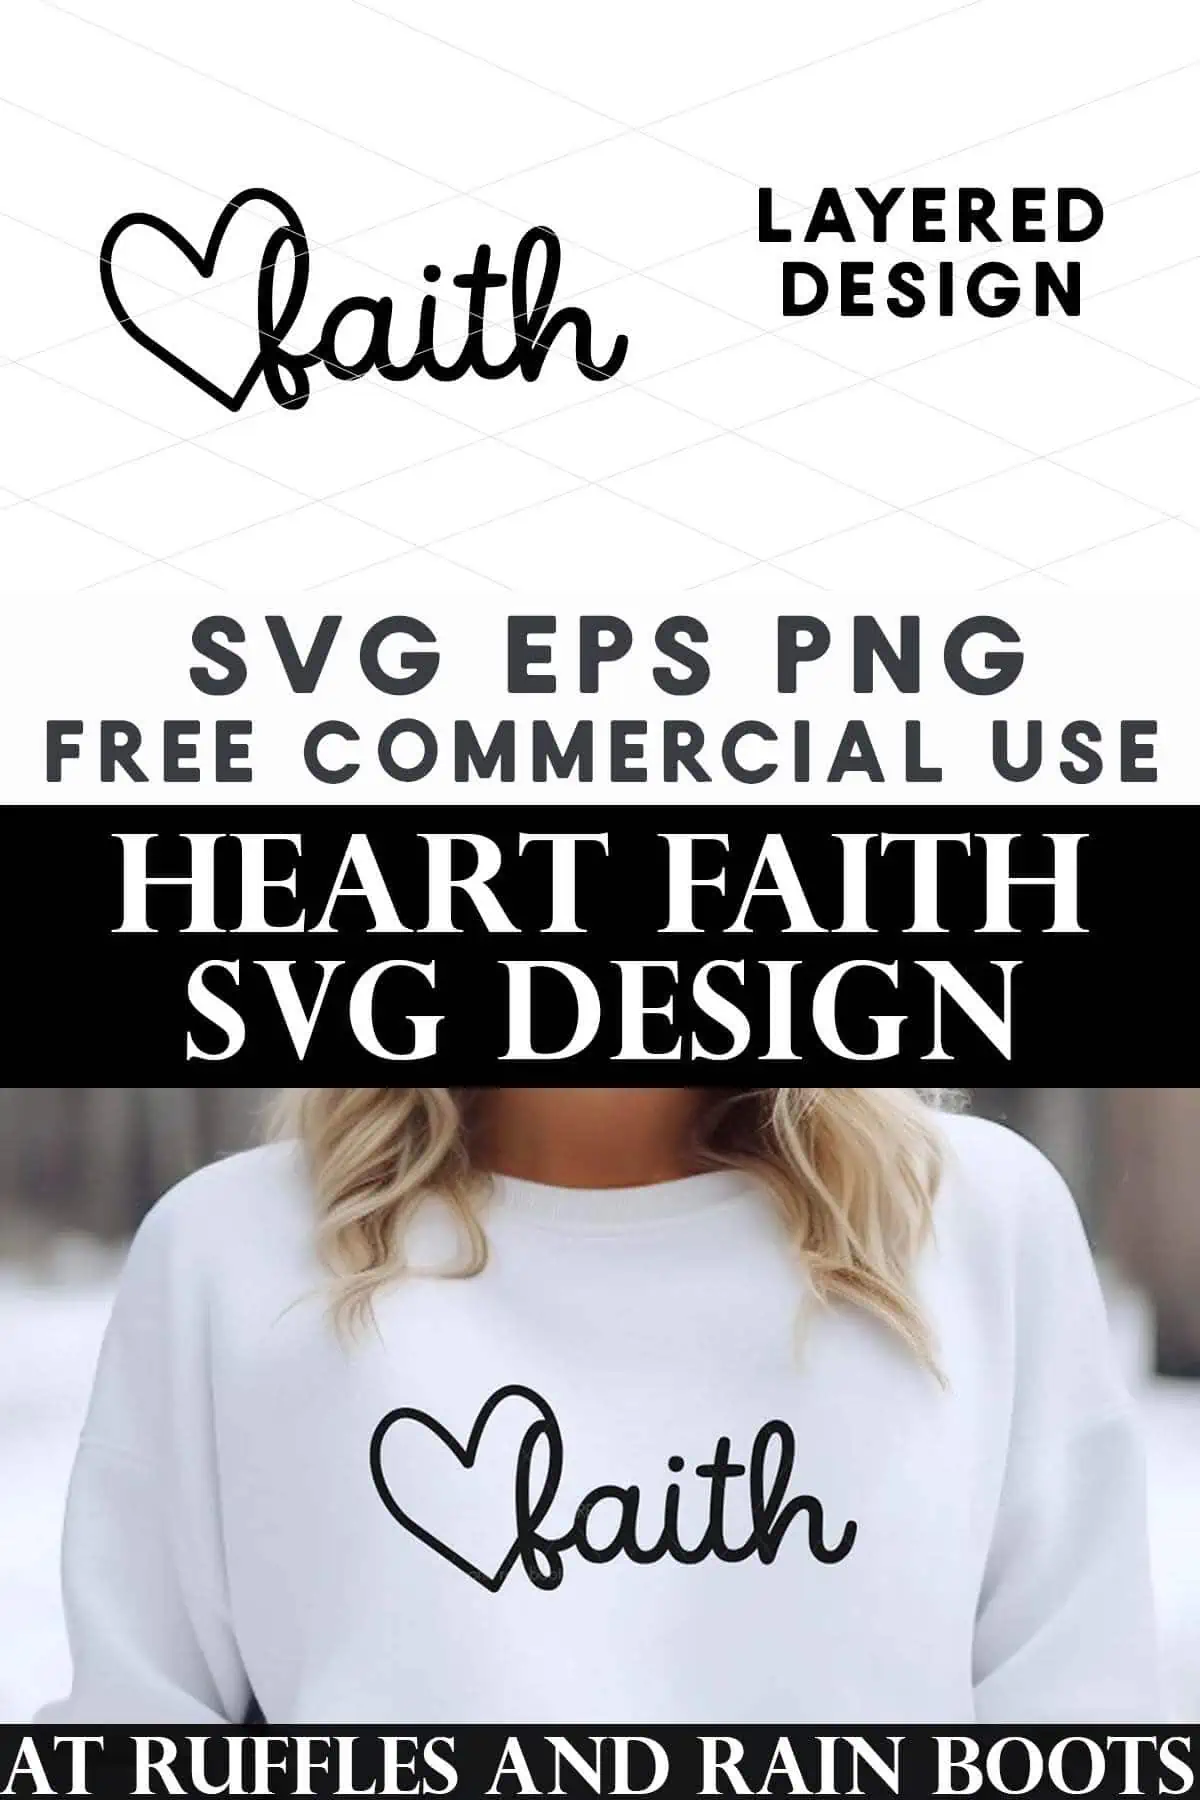 Split vertical image of a heart faith SVG design and an image of a woman outside wearing a white sweatshirt with faith and a heart in black vinyl.